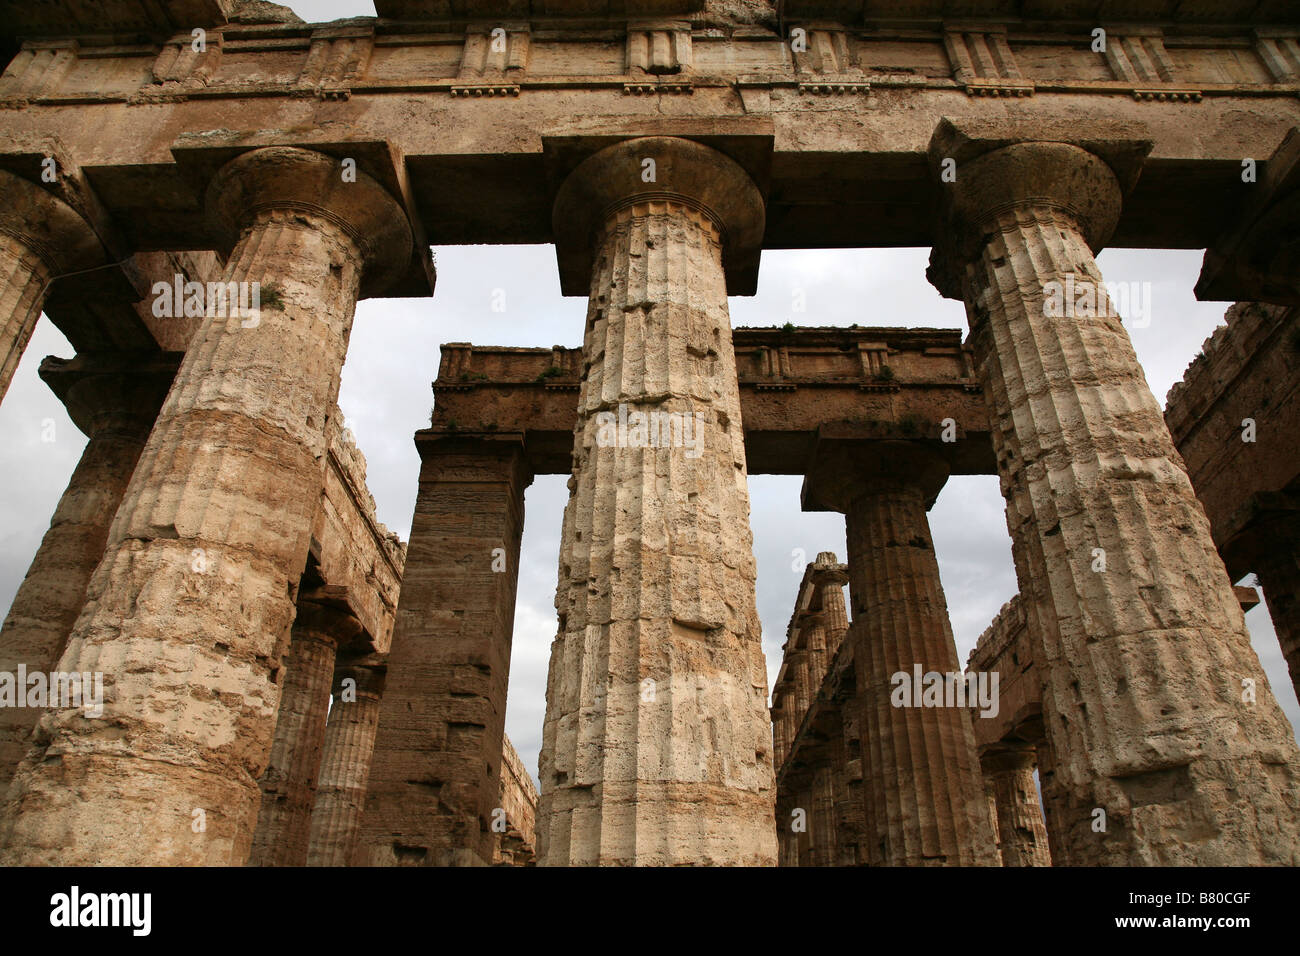 Doric temple of Hera from about 450 BC, formerly incorrectly attributed as the Temple of Poseidon or Apollo, in Paestum, Italy. Stock Photo